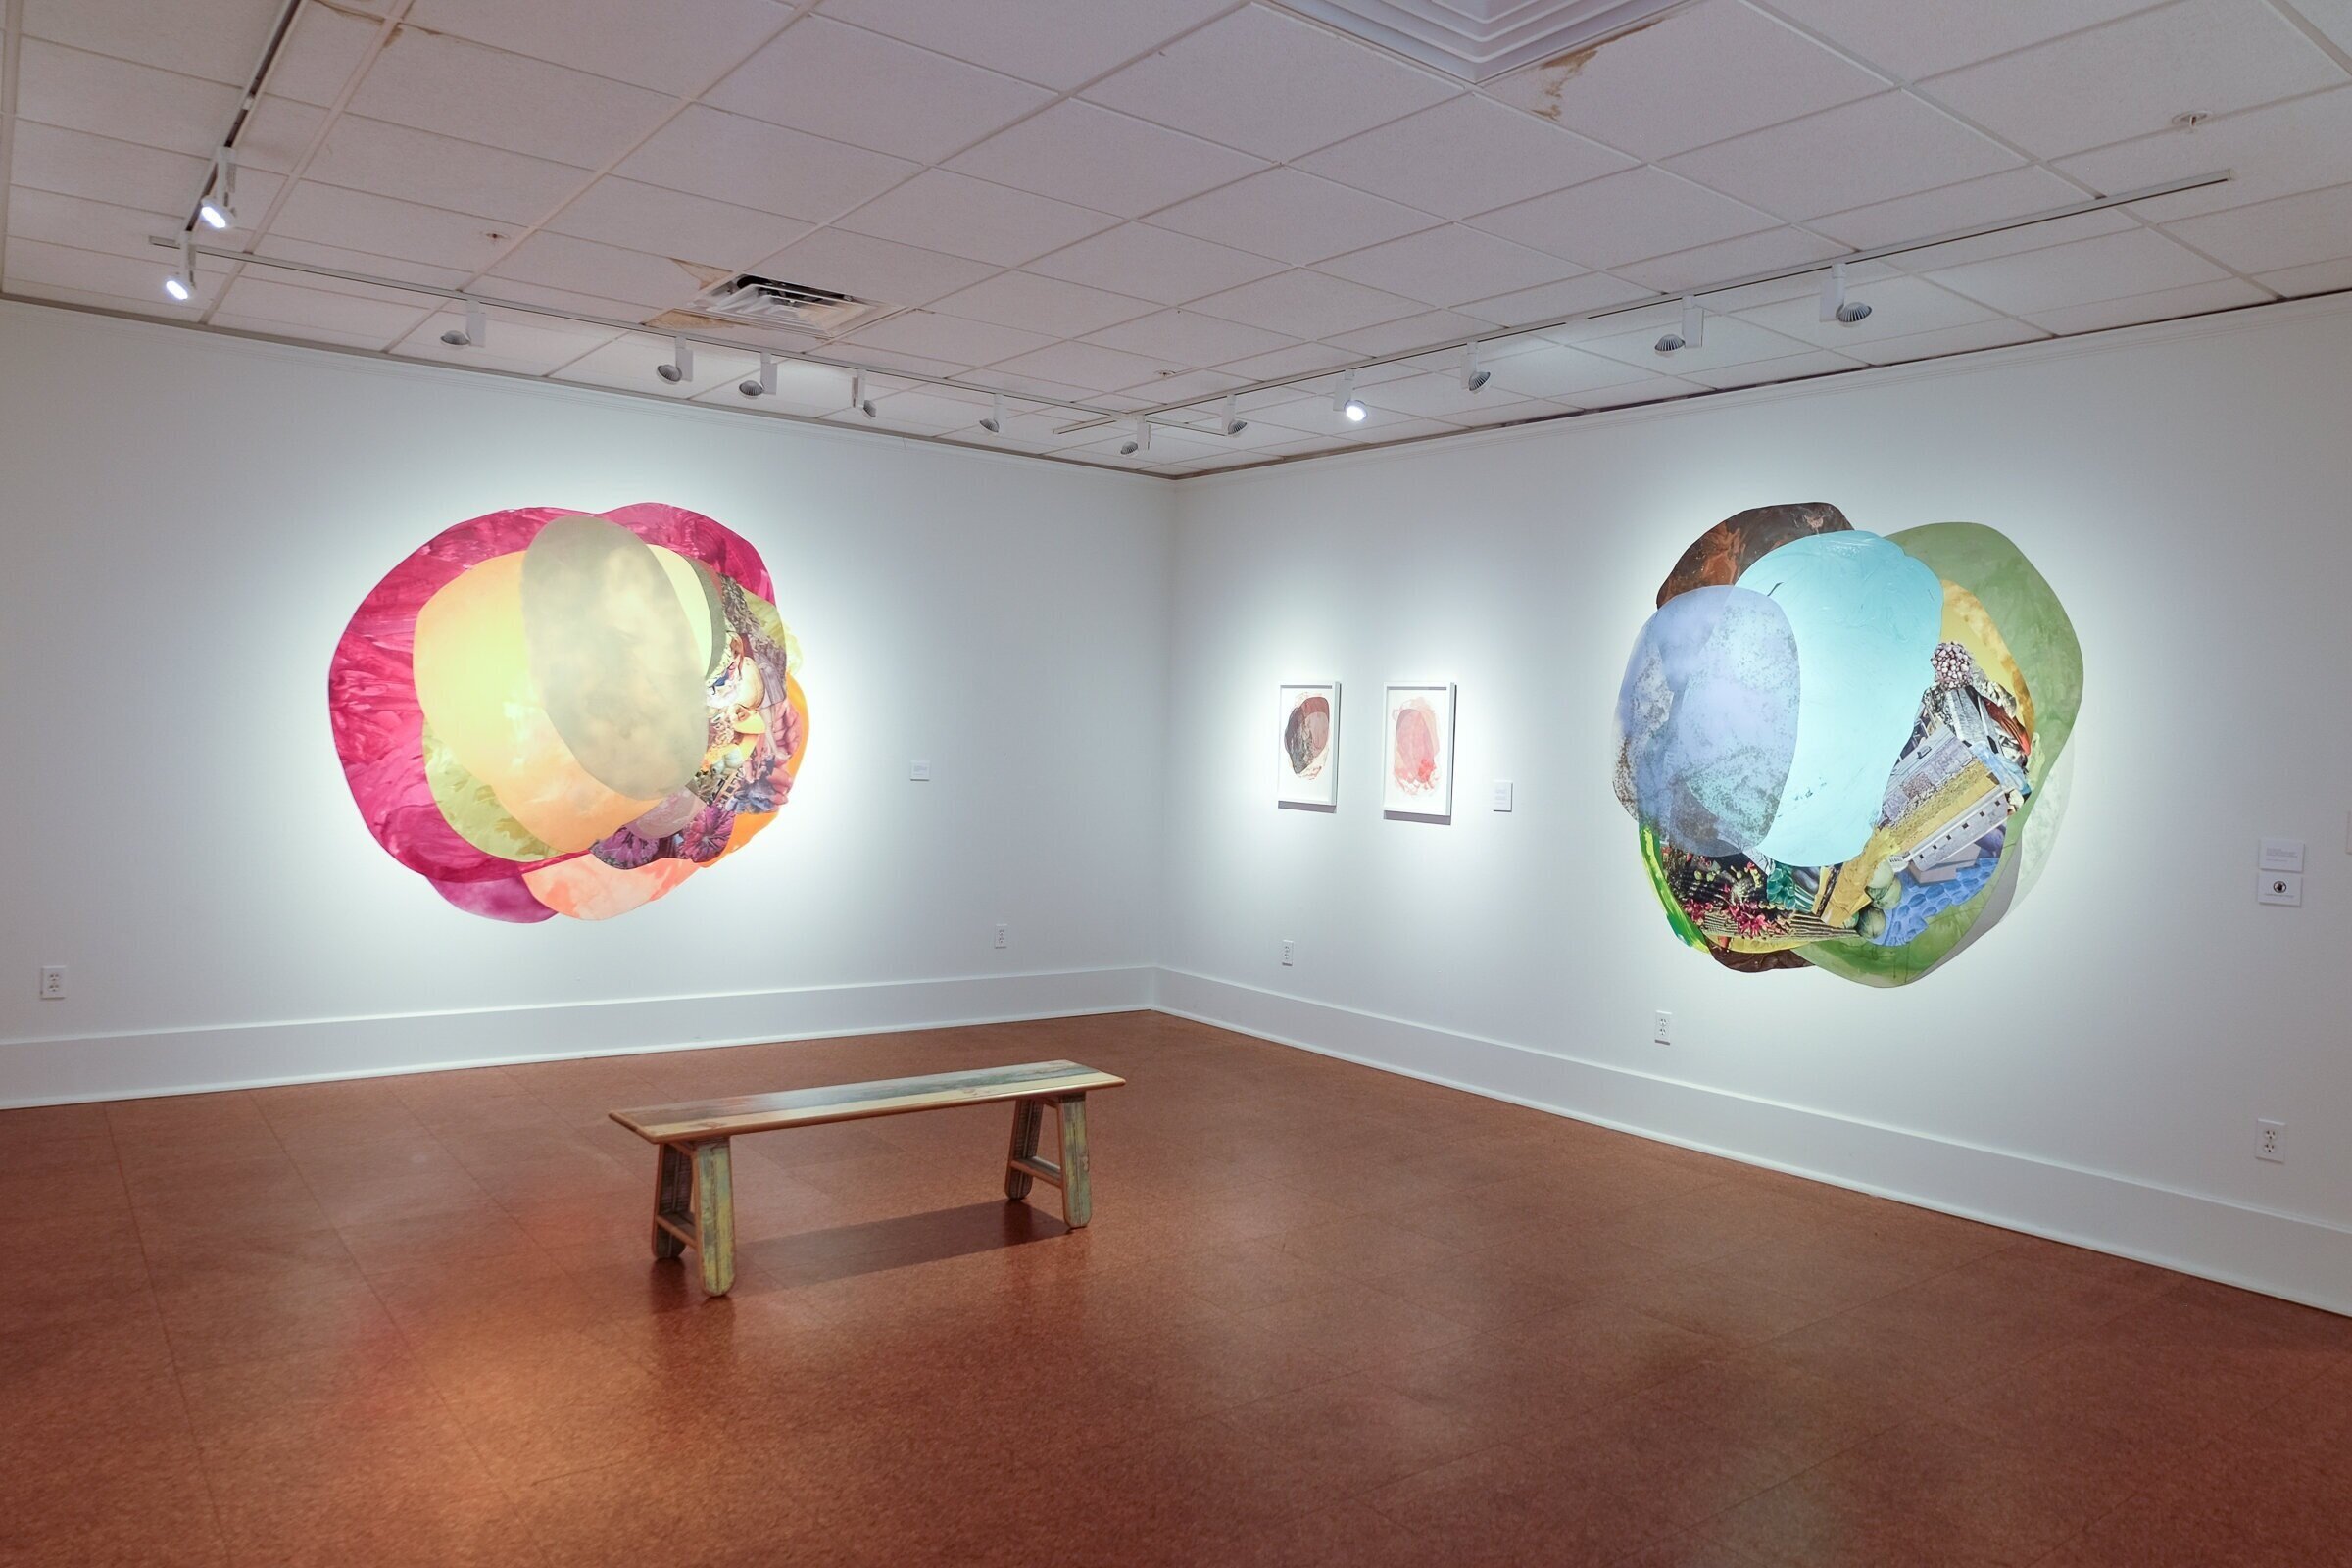 Installation shot from "Rooted by invisible means", May 30 – August 16, 2020 